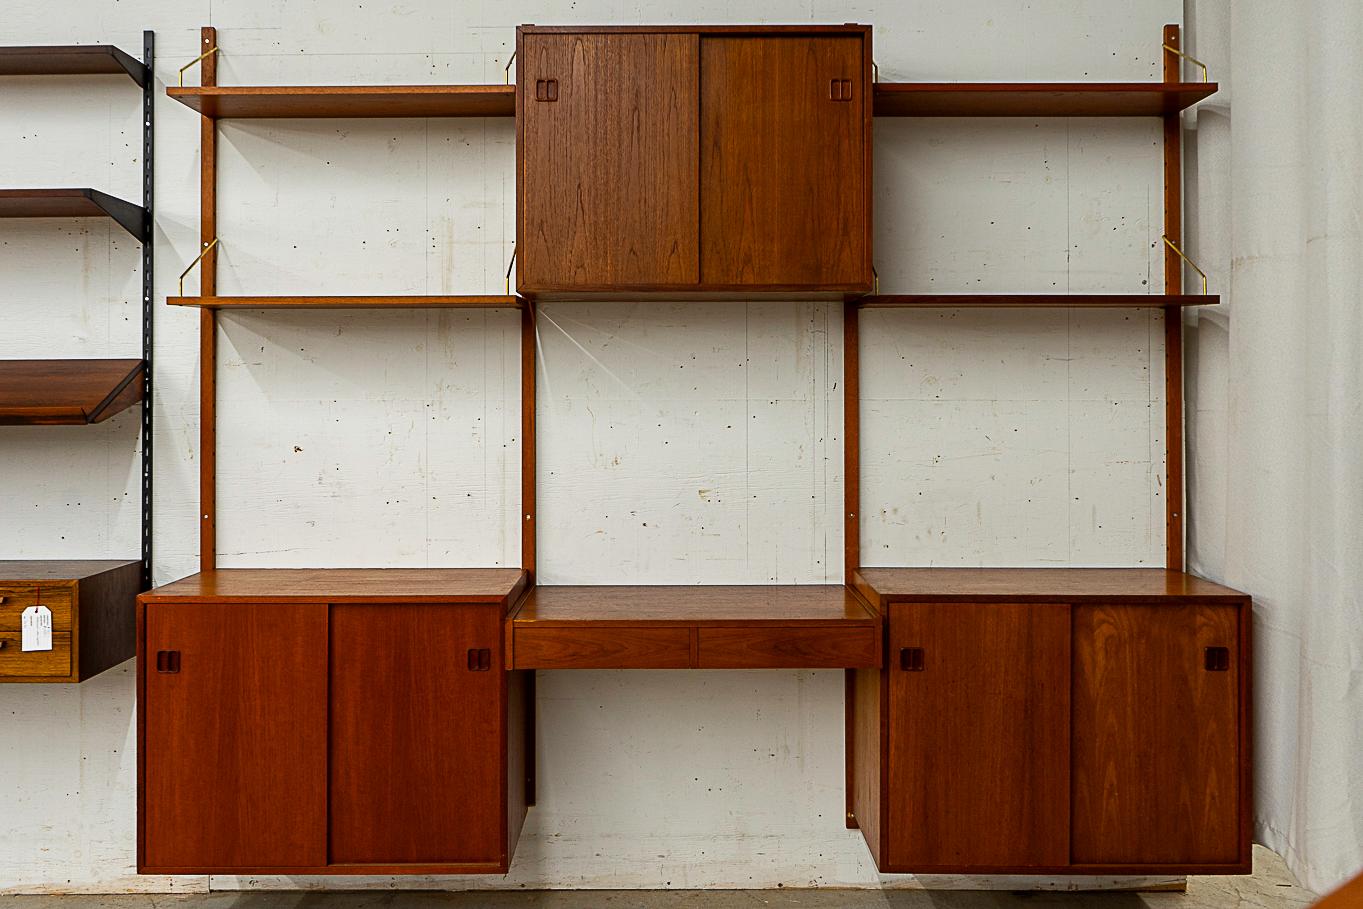 Danish Mid-Century teak wall system, circa 1960's. Fantastic wall system with solid wood trim, dovetail construction, stunning book-matched veneer and metal armature. Modular cabinetry and shelving, a versatile system for home or office! Includes: 3